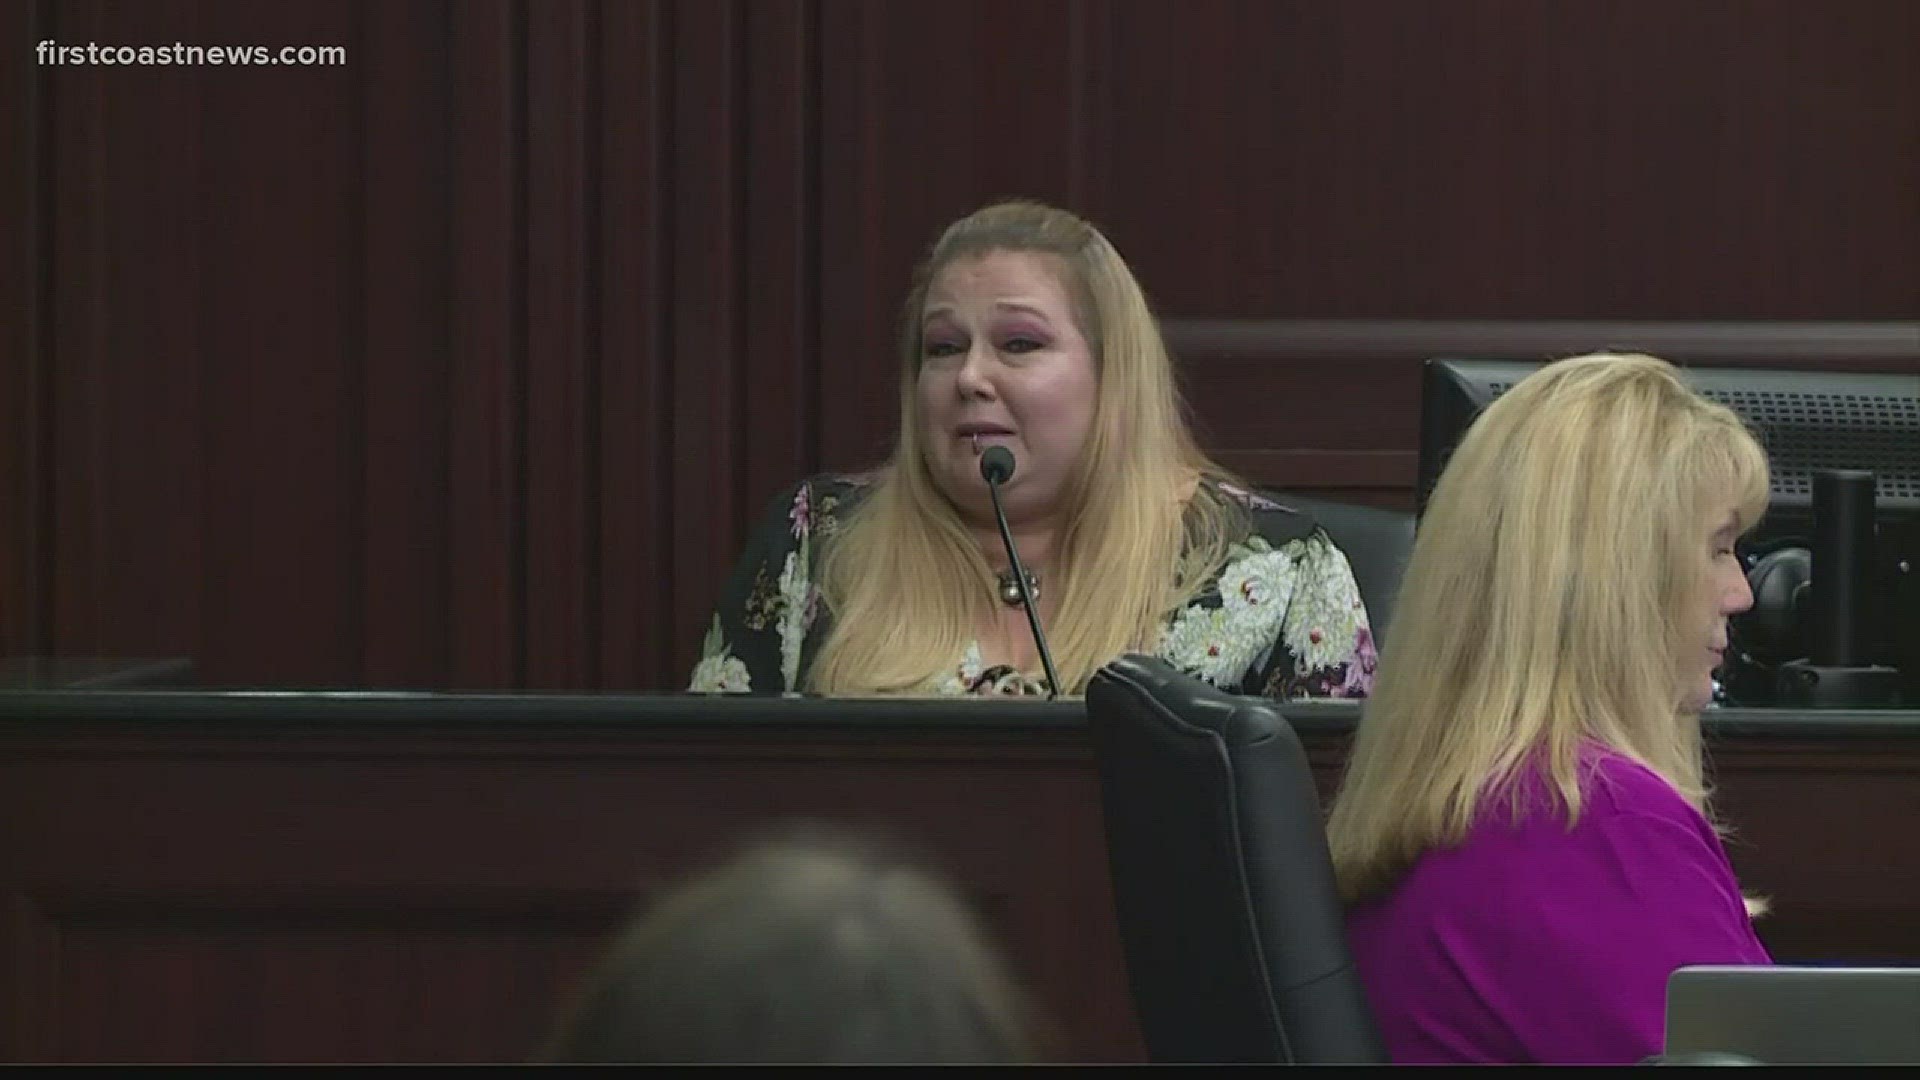 A woman who claims Donald Smith tried to kidnap her as a child took the stand Tuesday to tell her story.